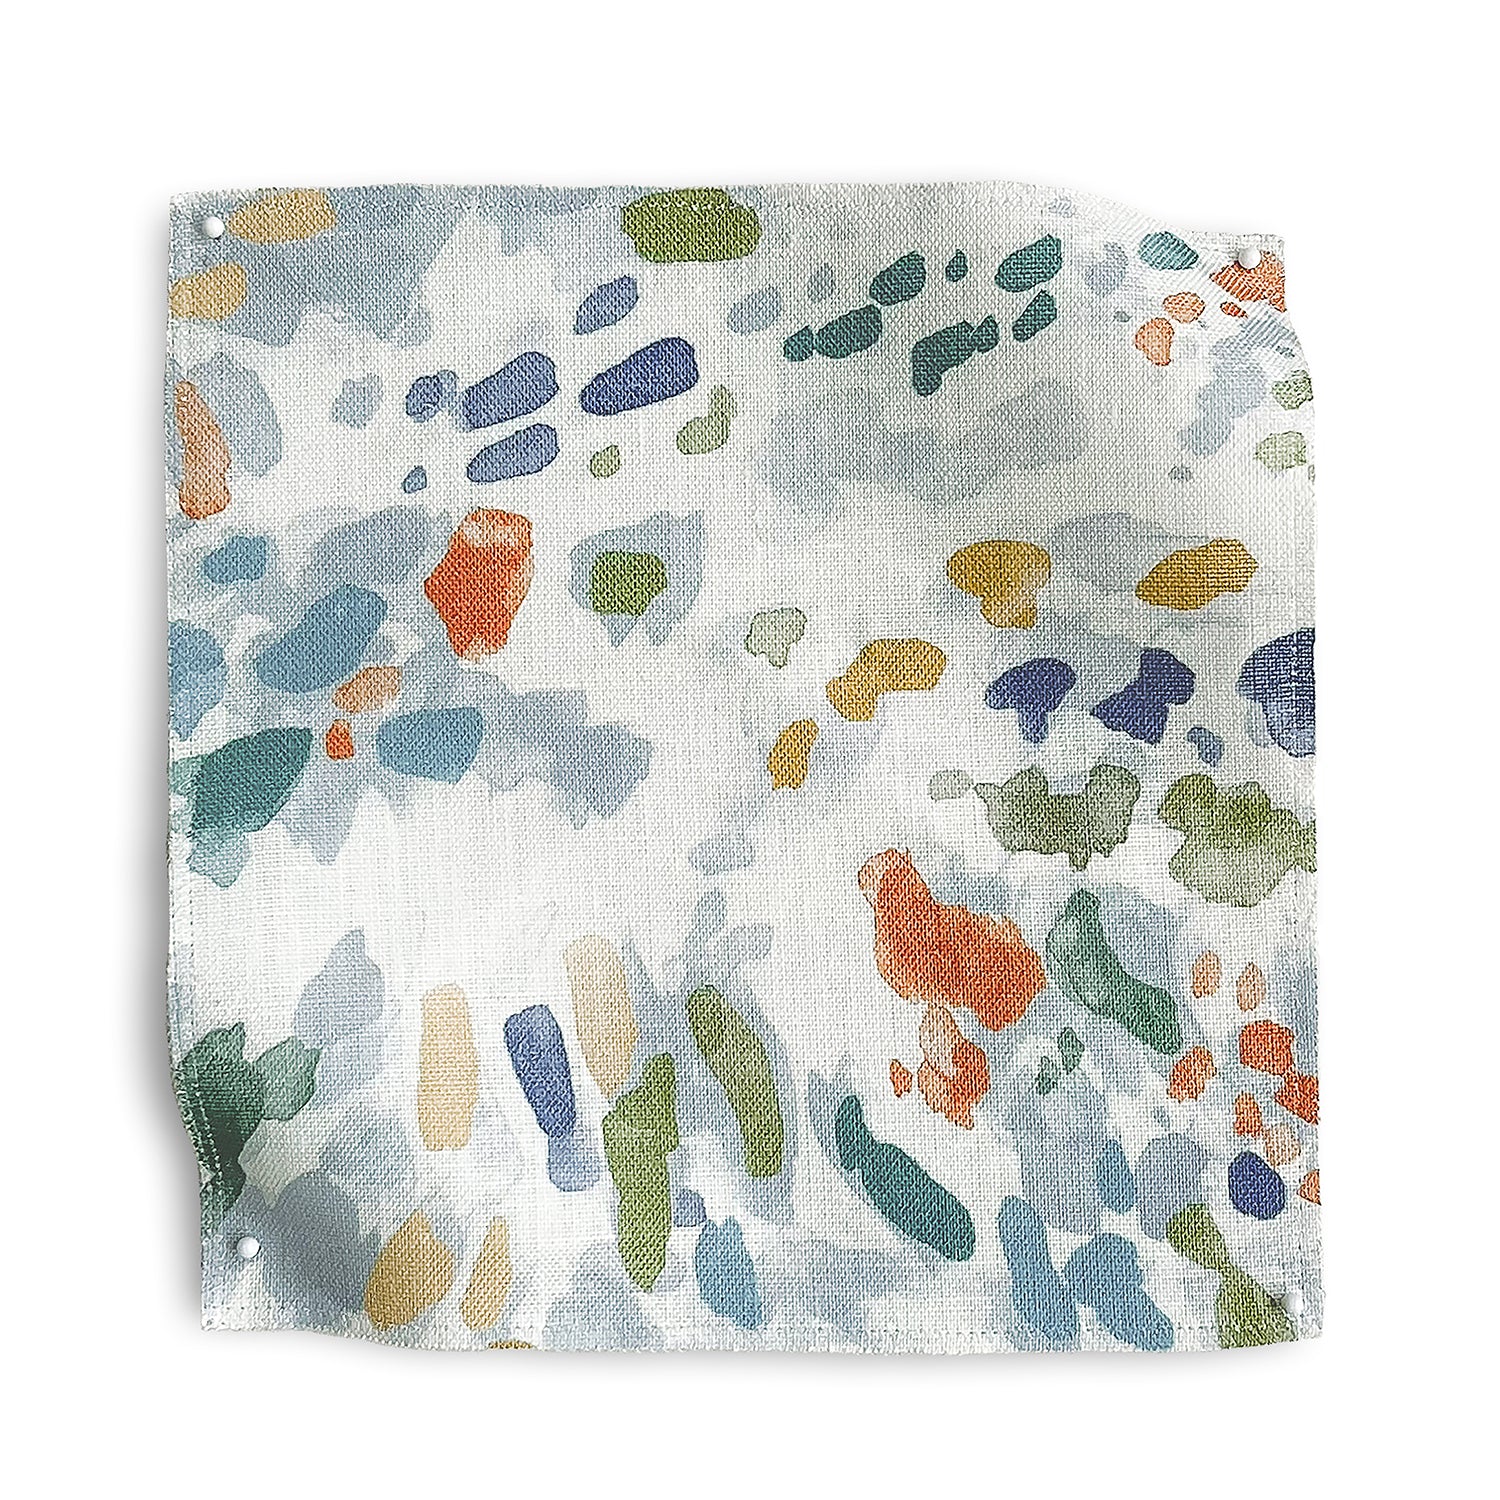 Square fabric swatch in a painterly cloud print in shades of red, green, yellow and blue on a cream field.